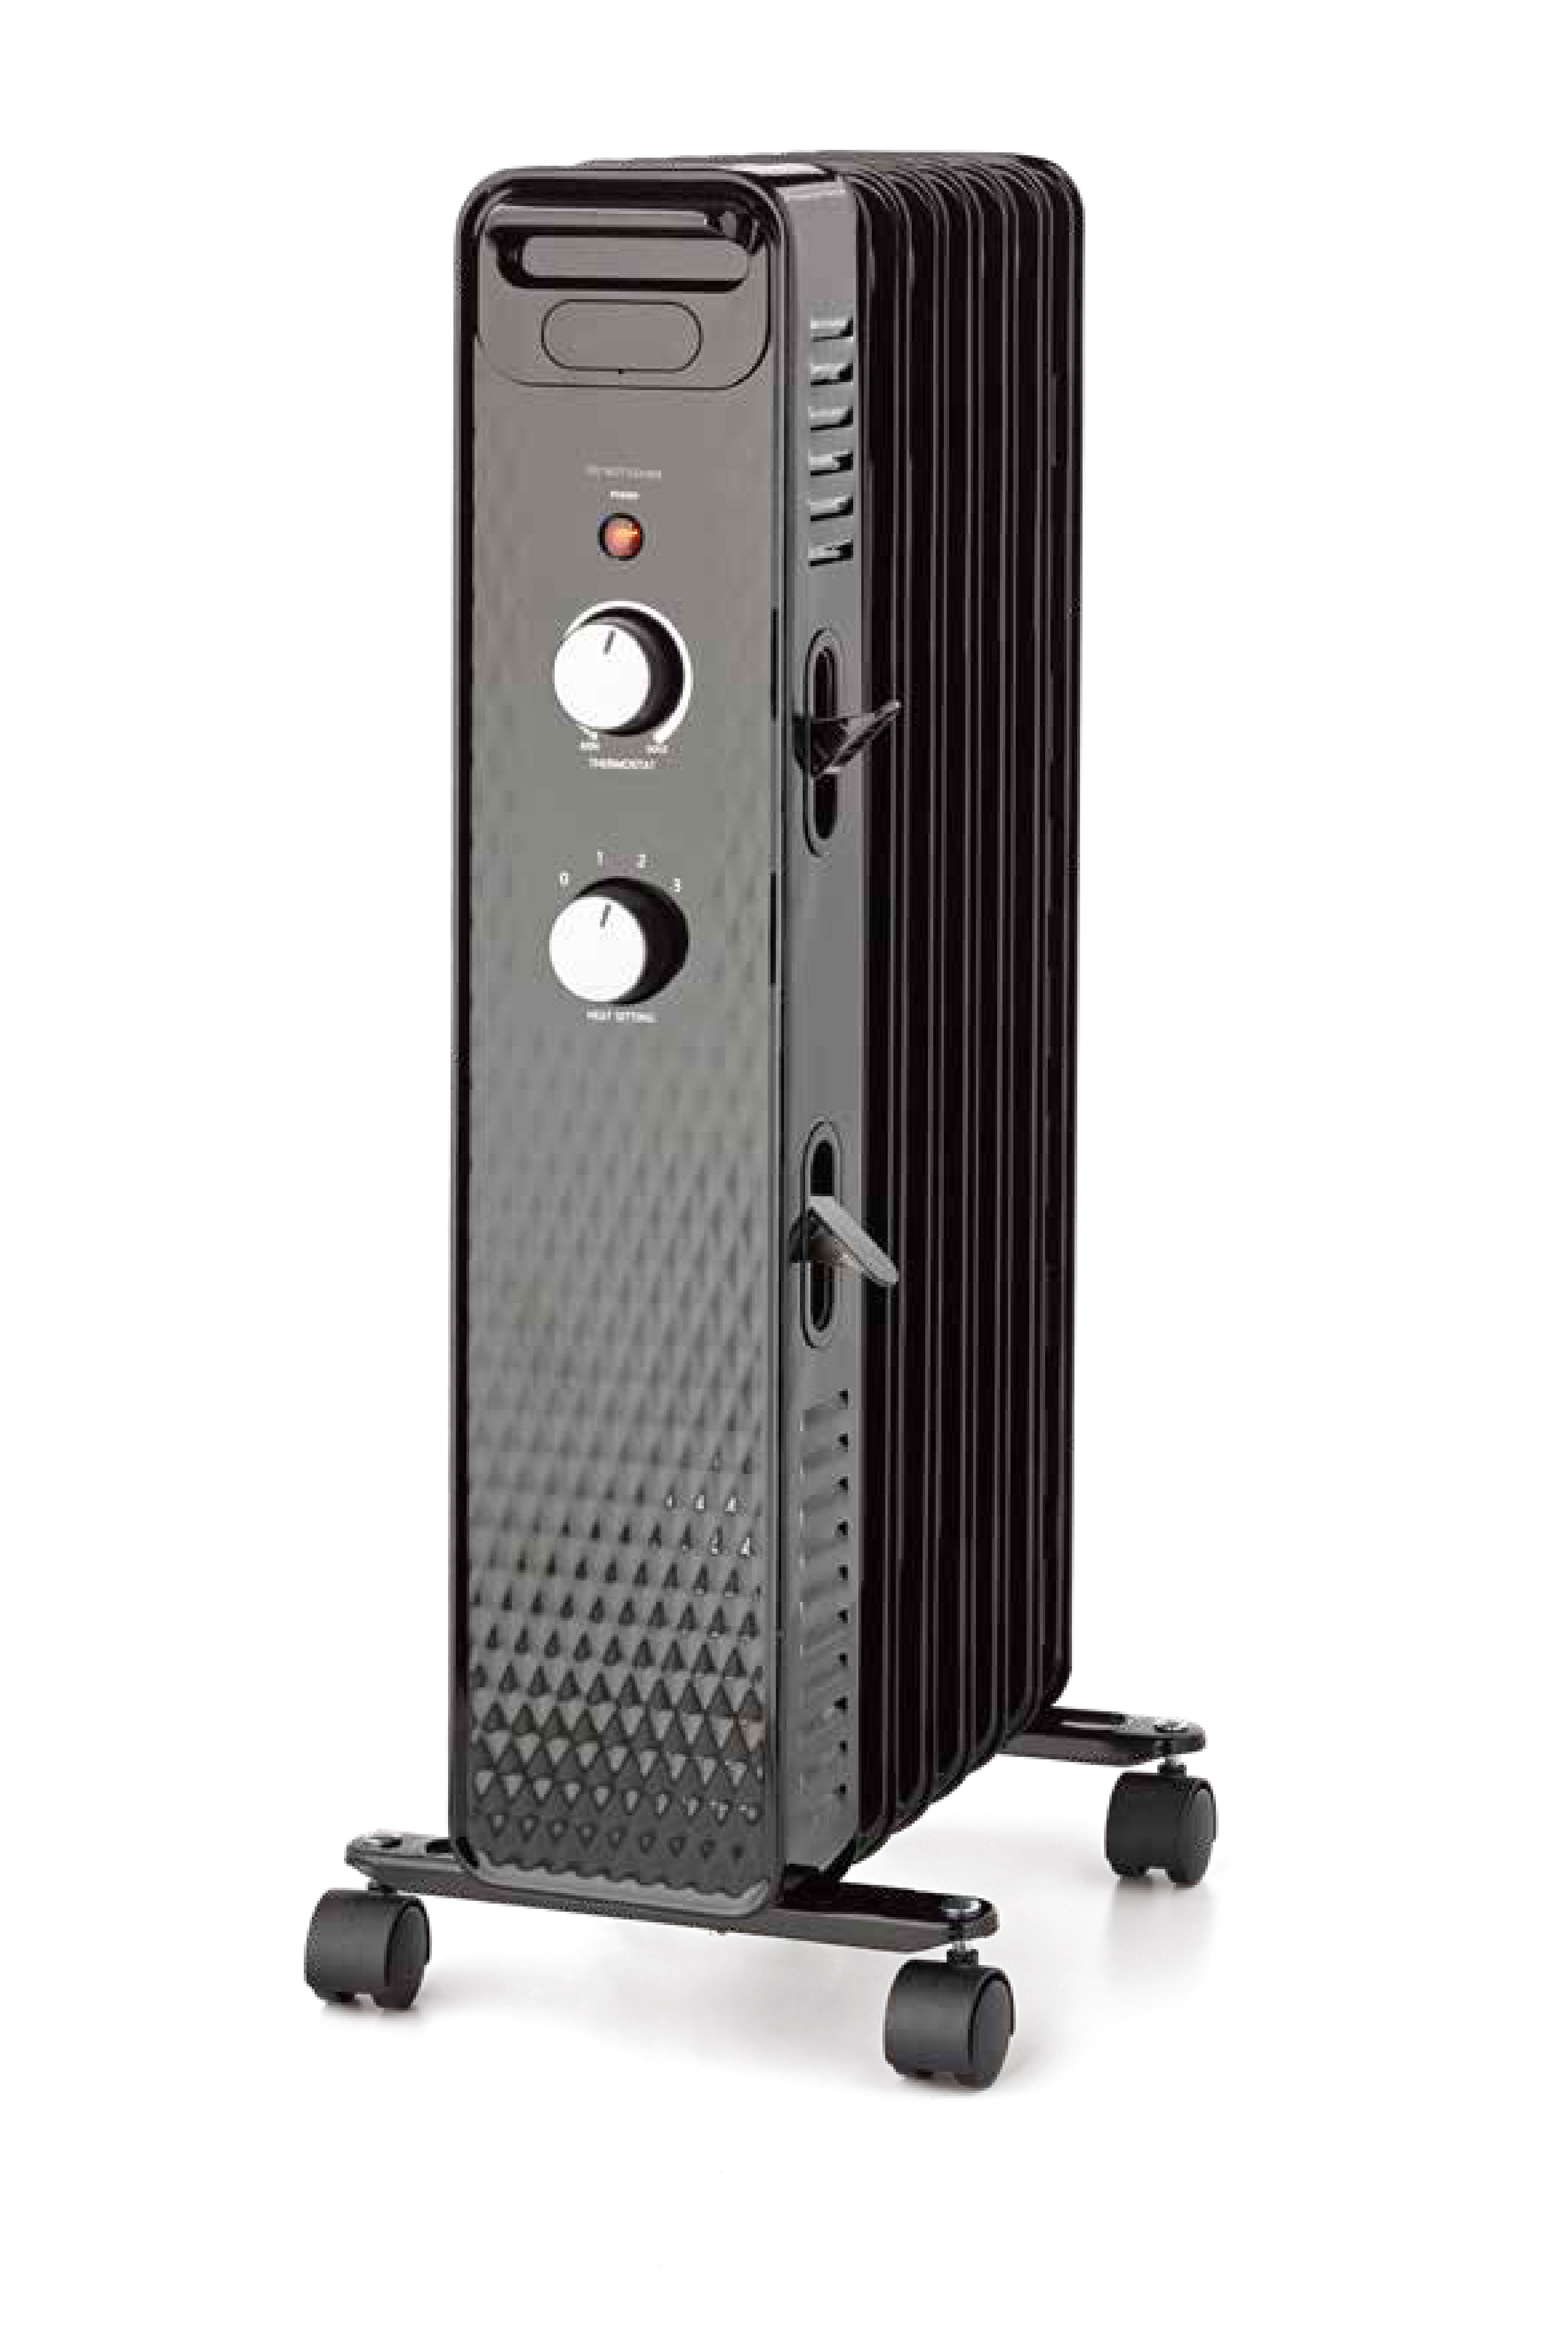 Black Daewoo 1000W Portable Floor Oil Filled Radiator Heater with Thermostat & Timer 